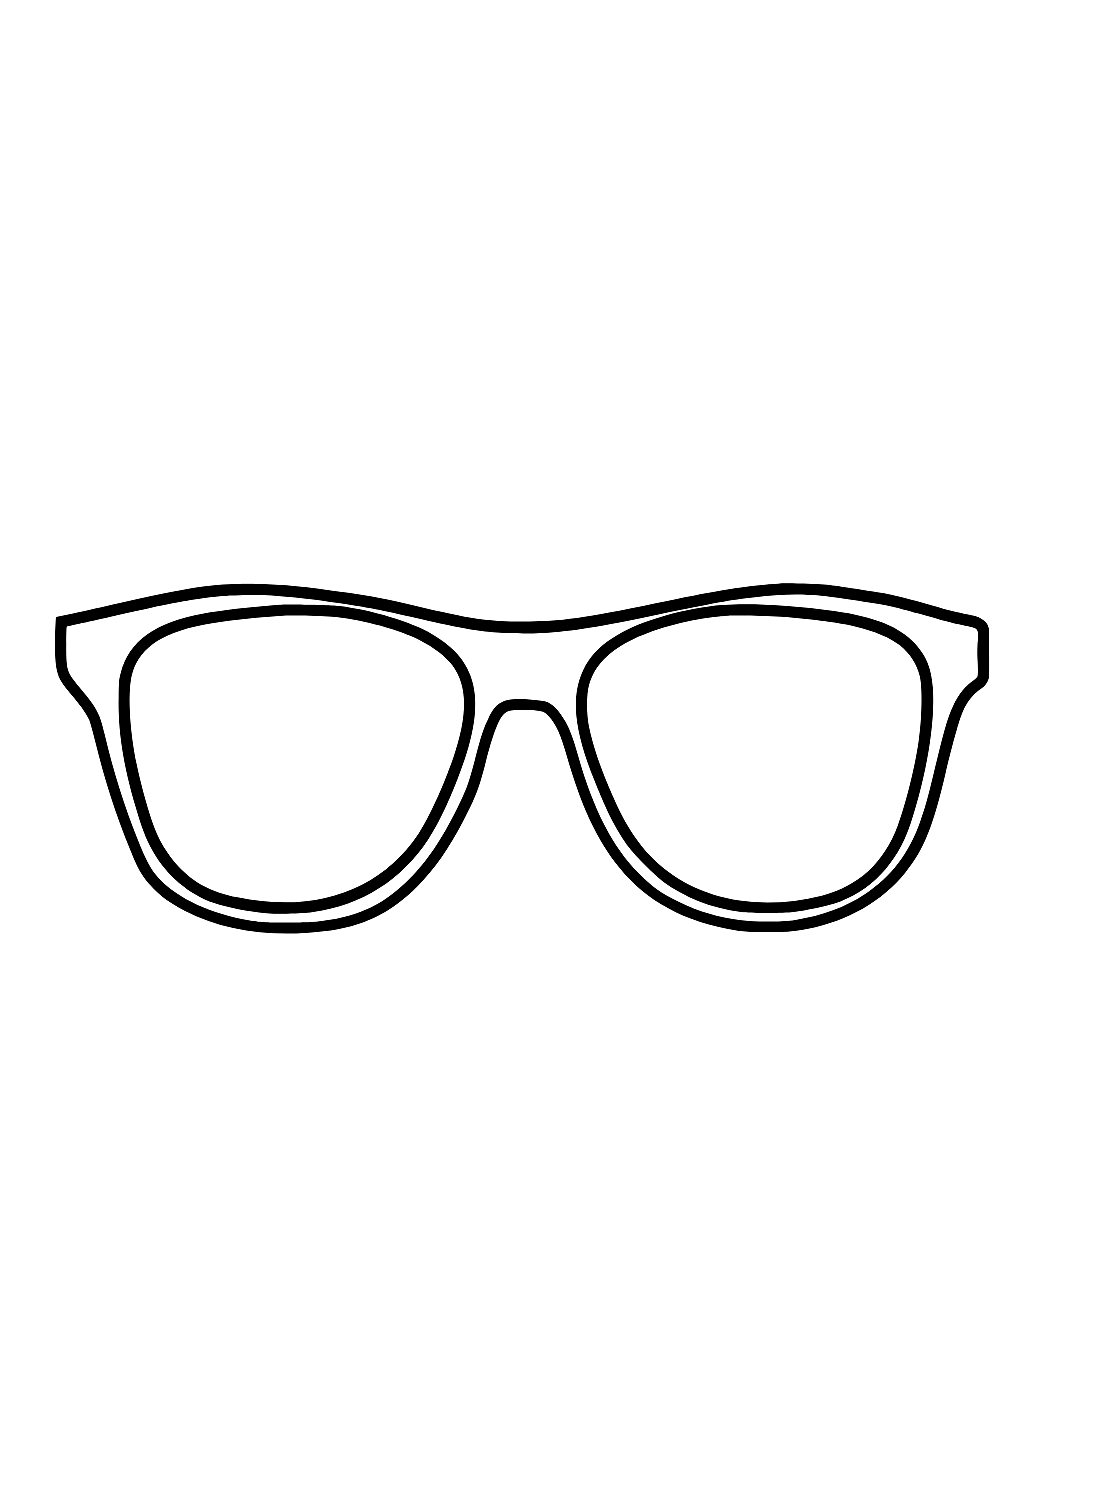 Images Sunglasses Coloring Page